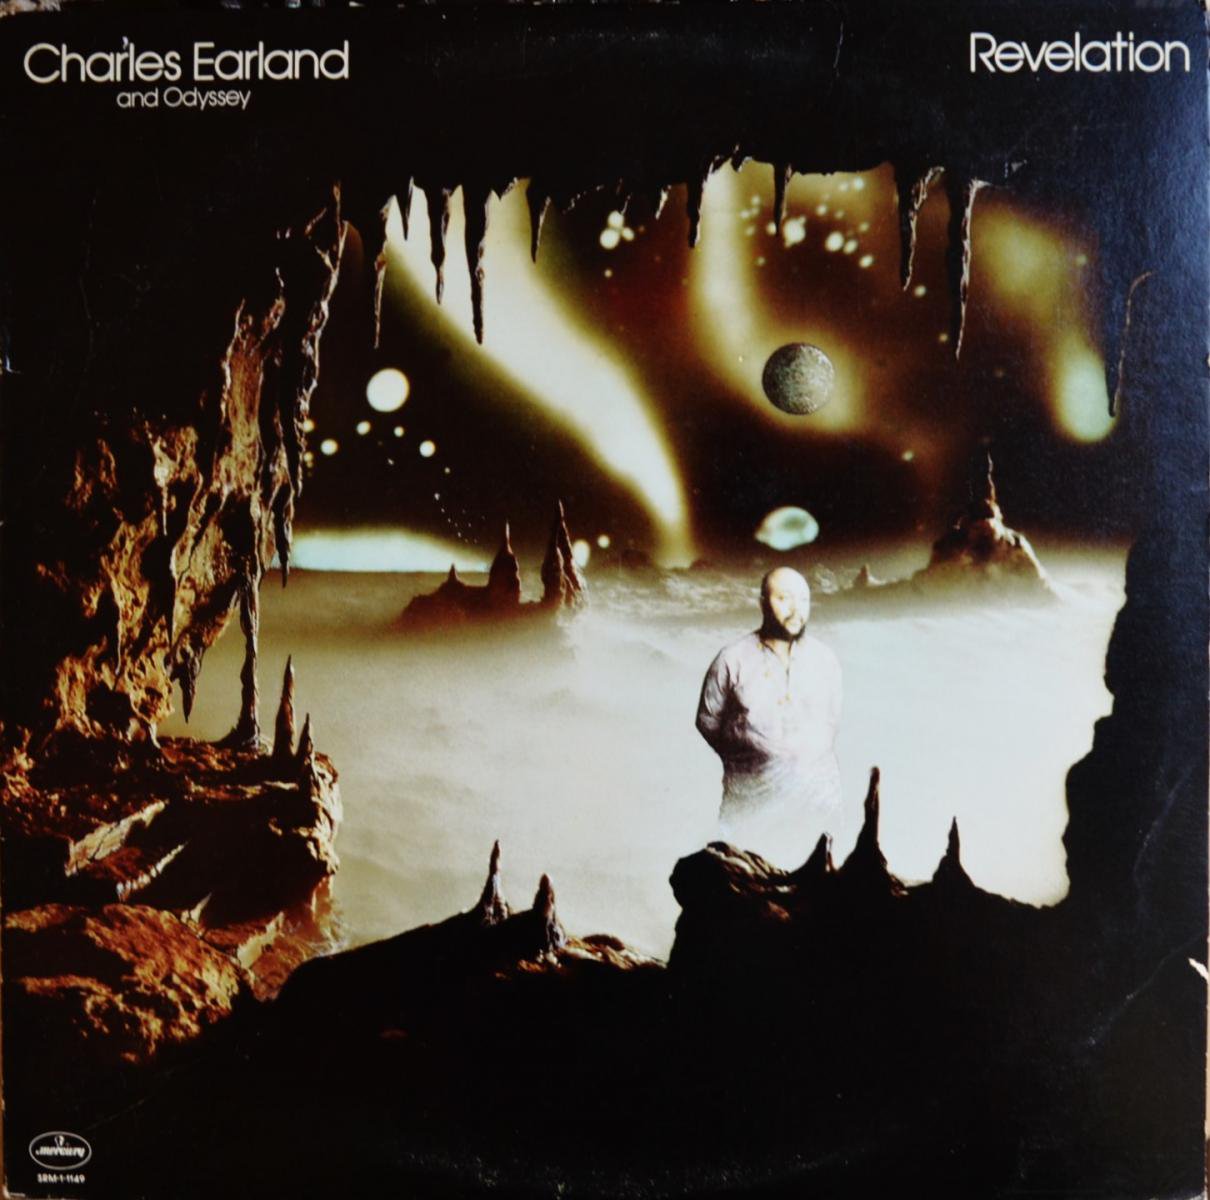 CHARLES EARLAND/LEAVING THIS PLANET US盤 - 洋楽